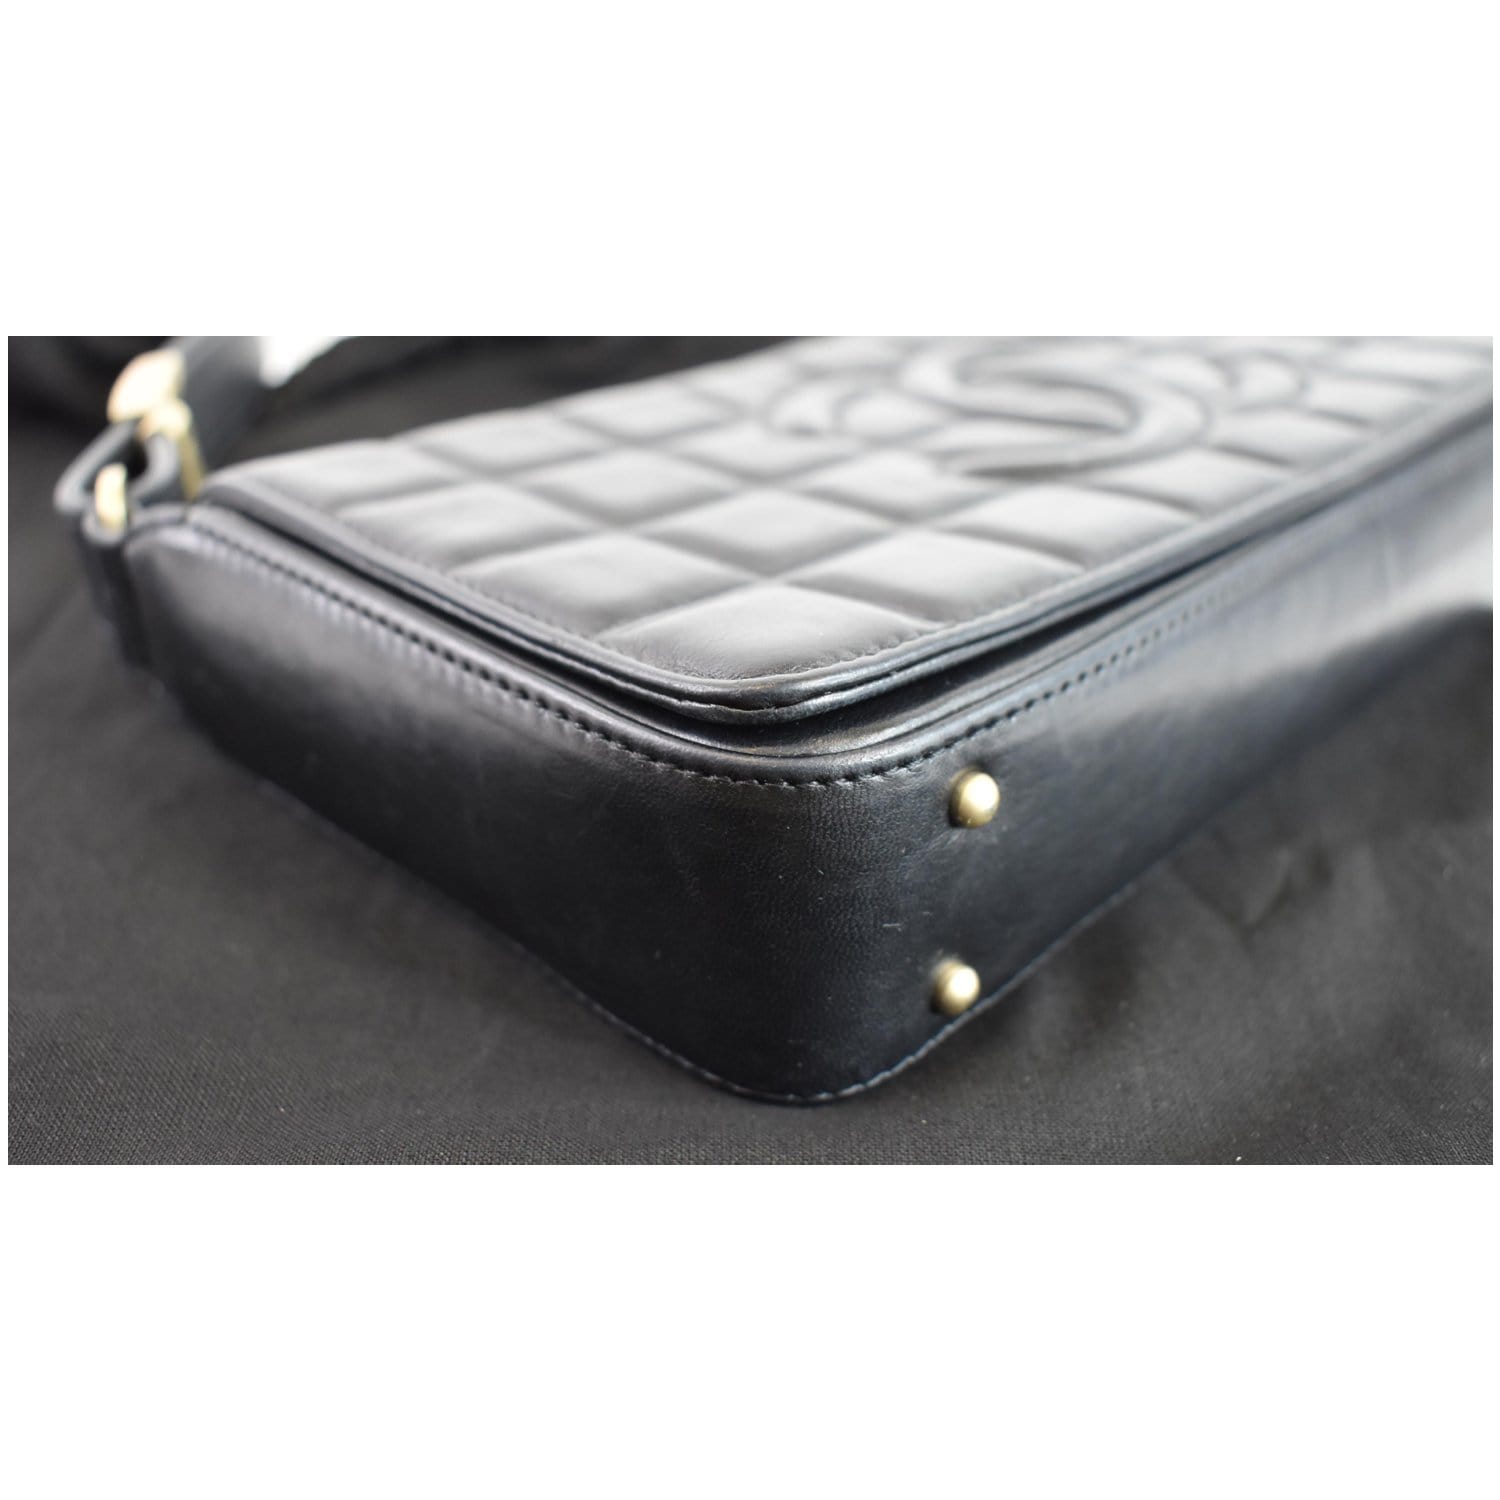 Chanel black quilted leather chocolate bar flap at Jill's Consignment